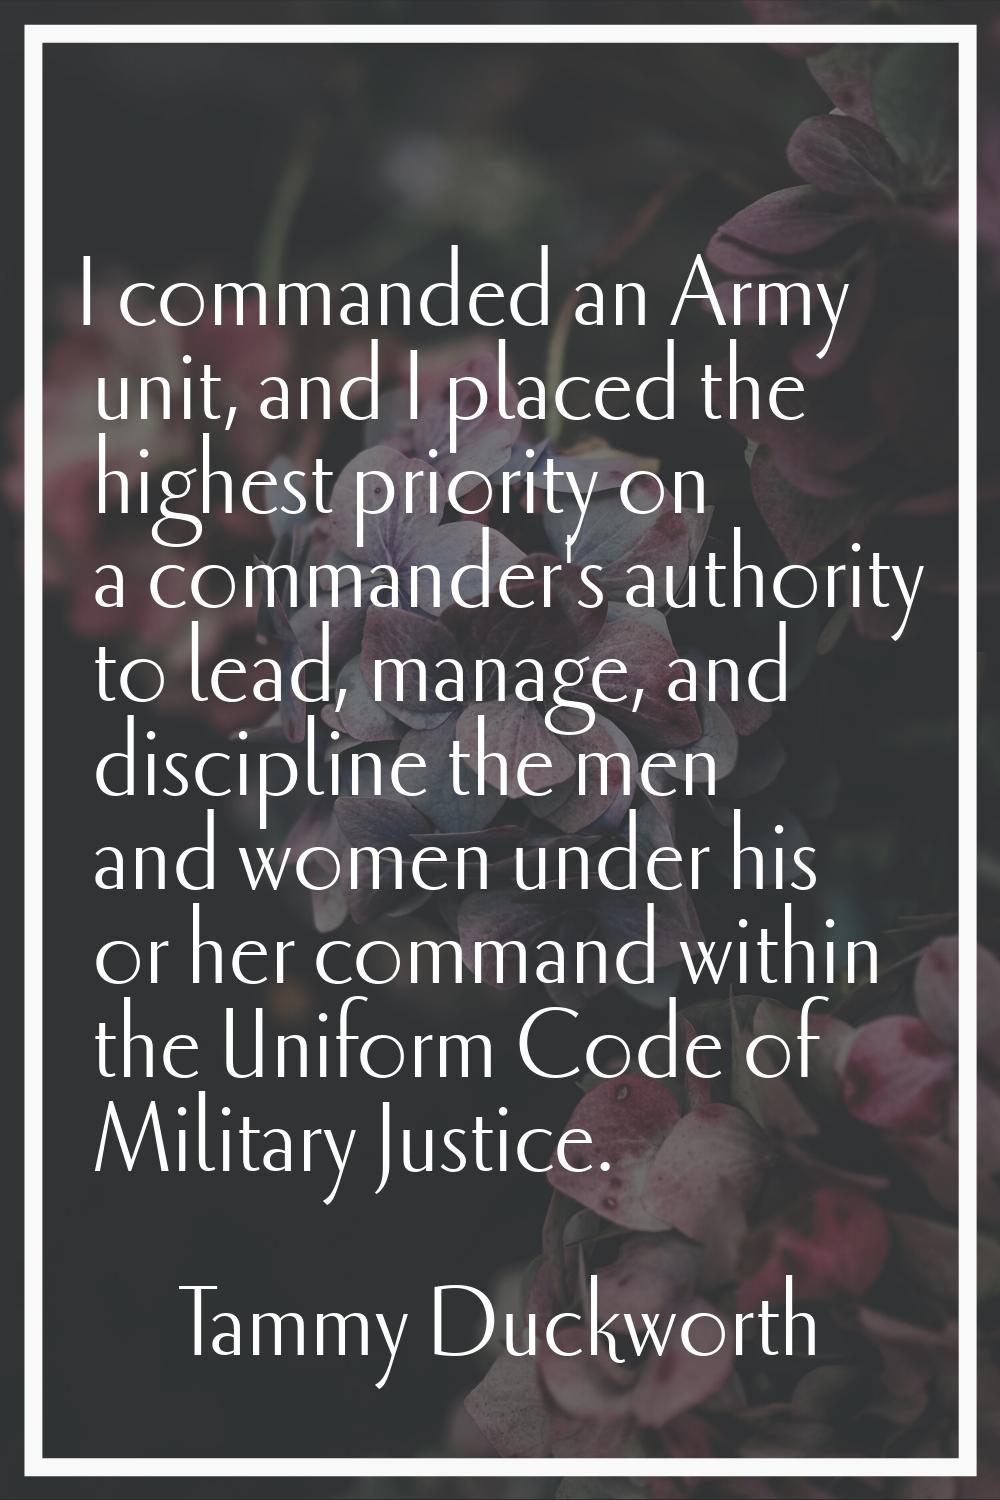 I commanded an Army unit, and I placed the highest priority on a commander's authority to lead, man